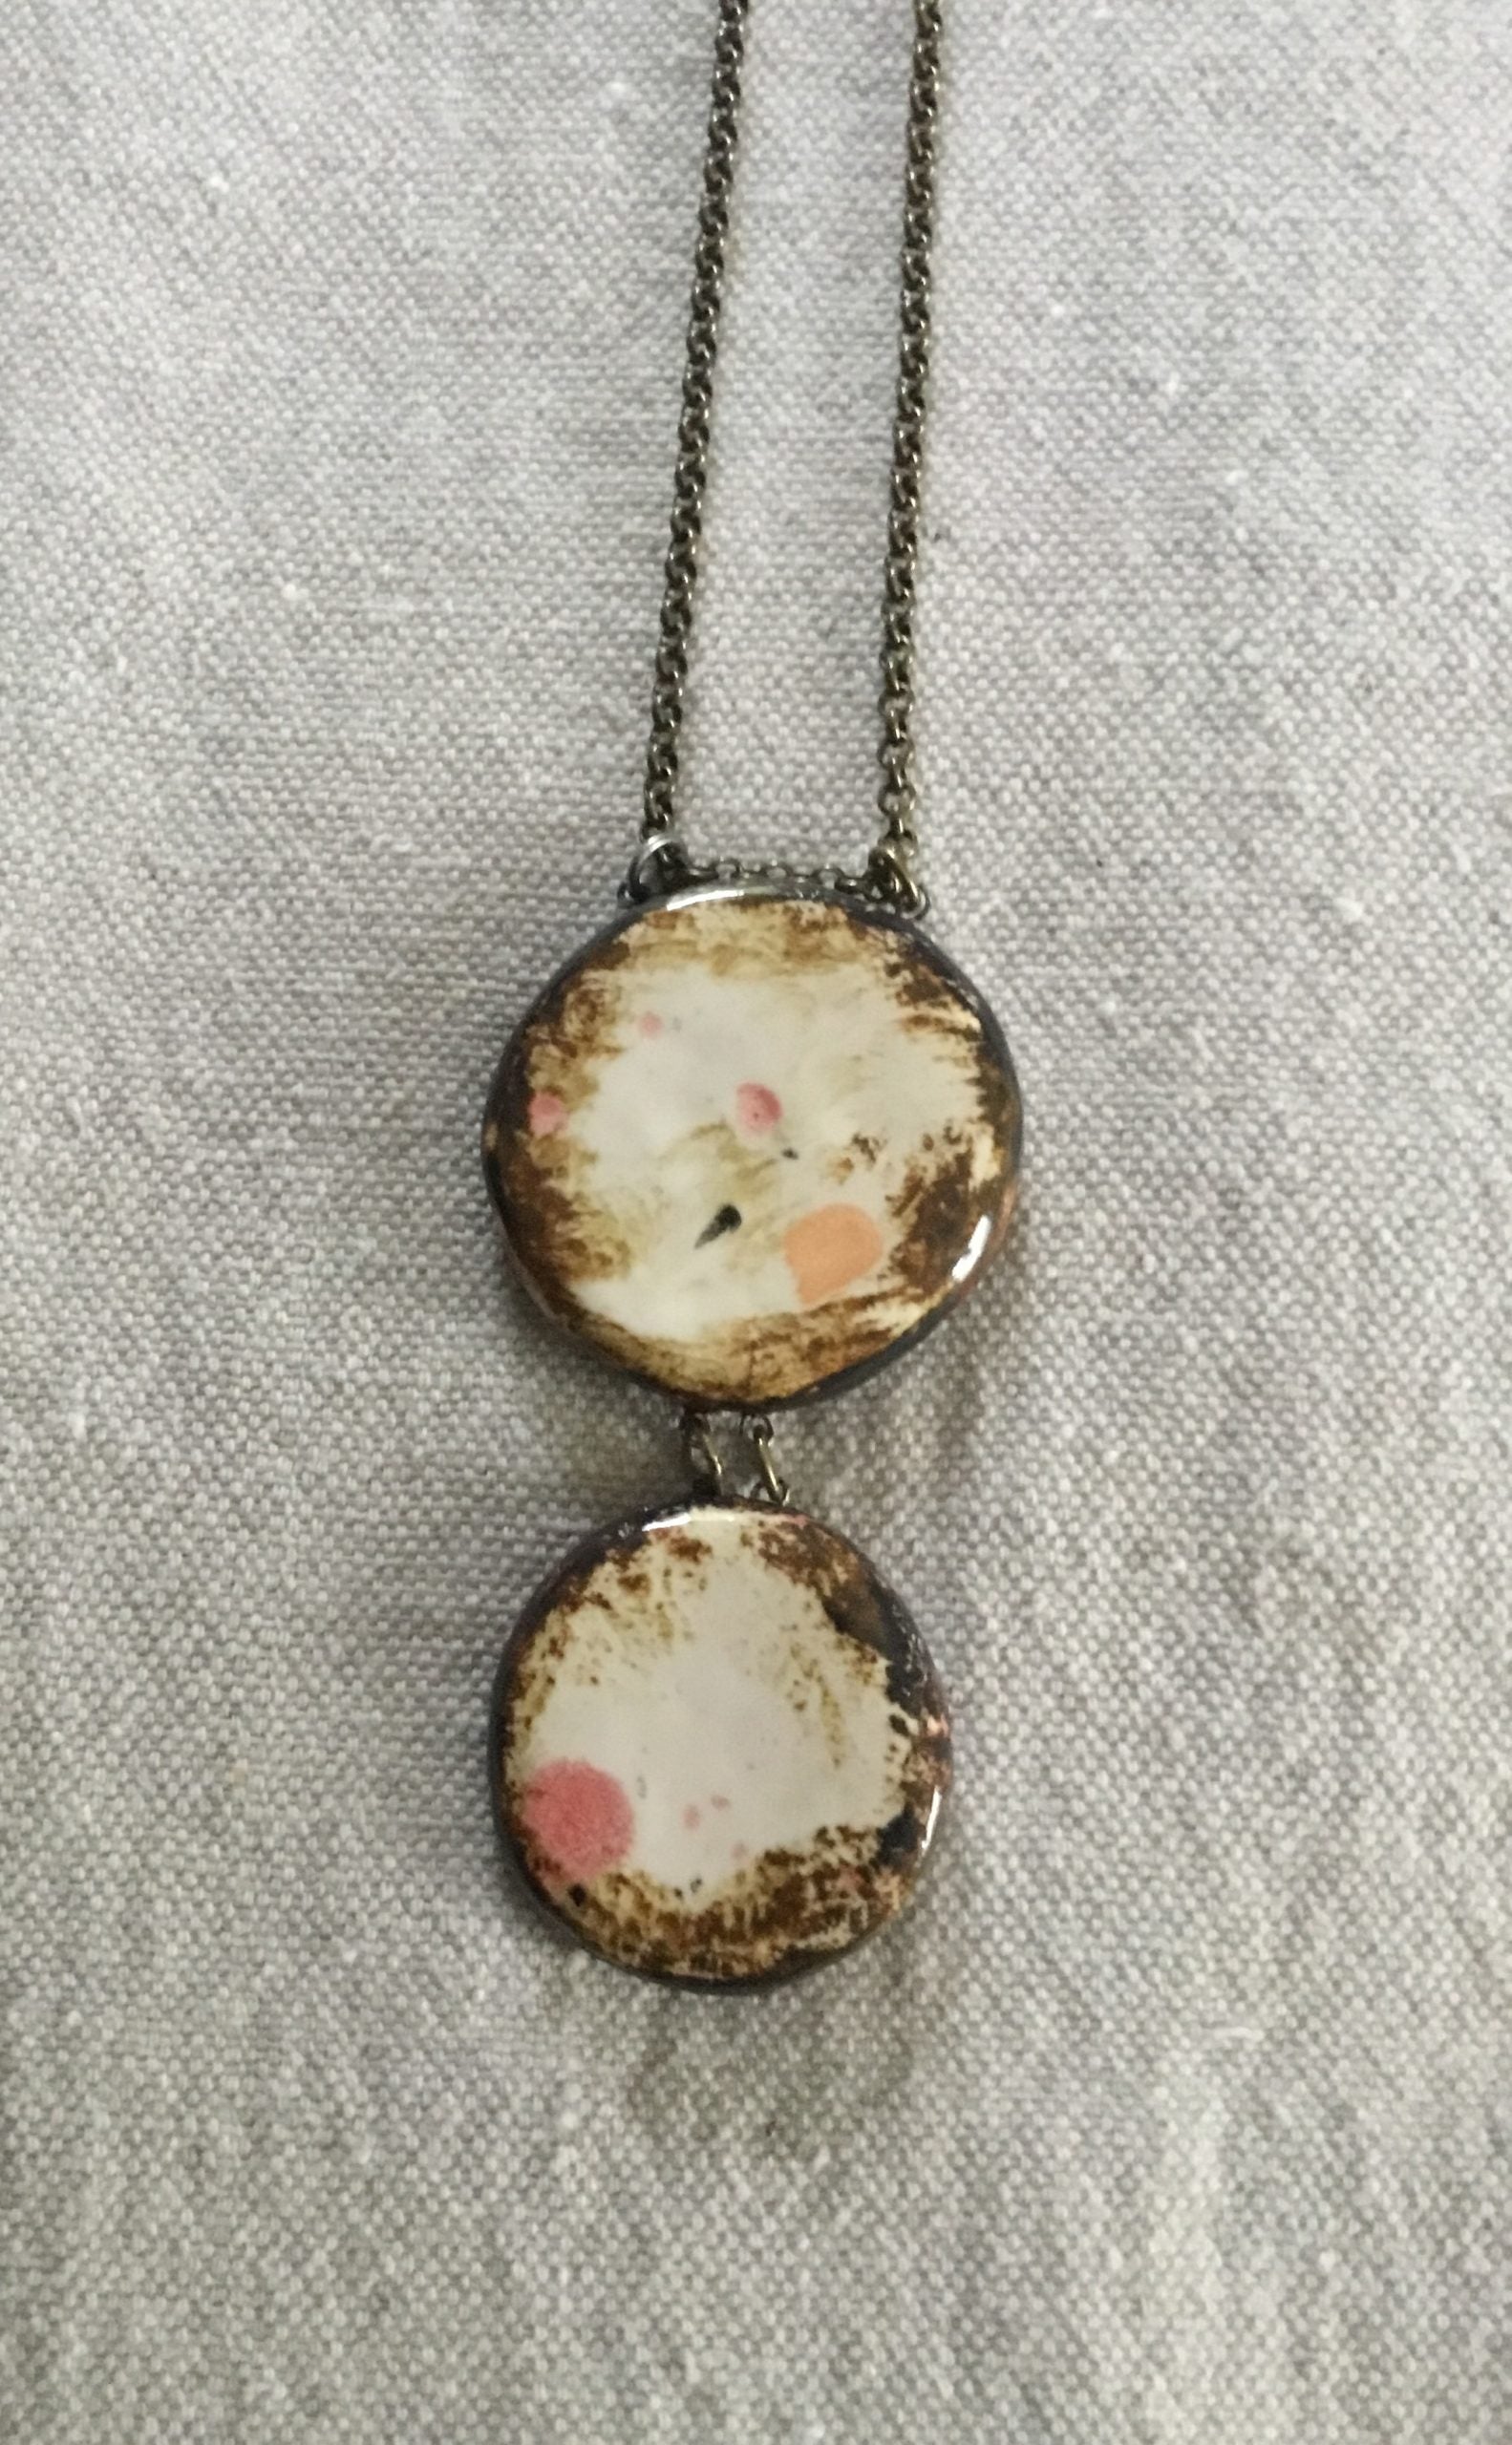 Lady Bug Reversible Double Necklace